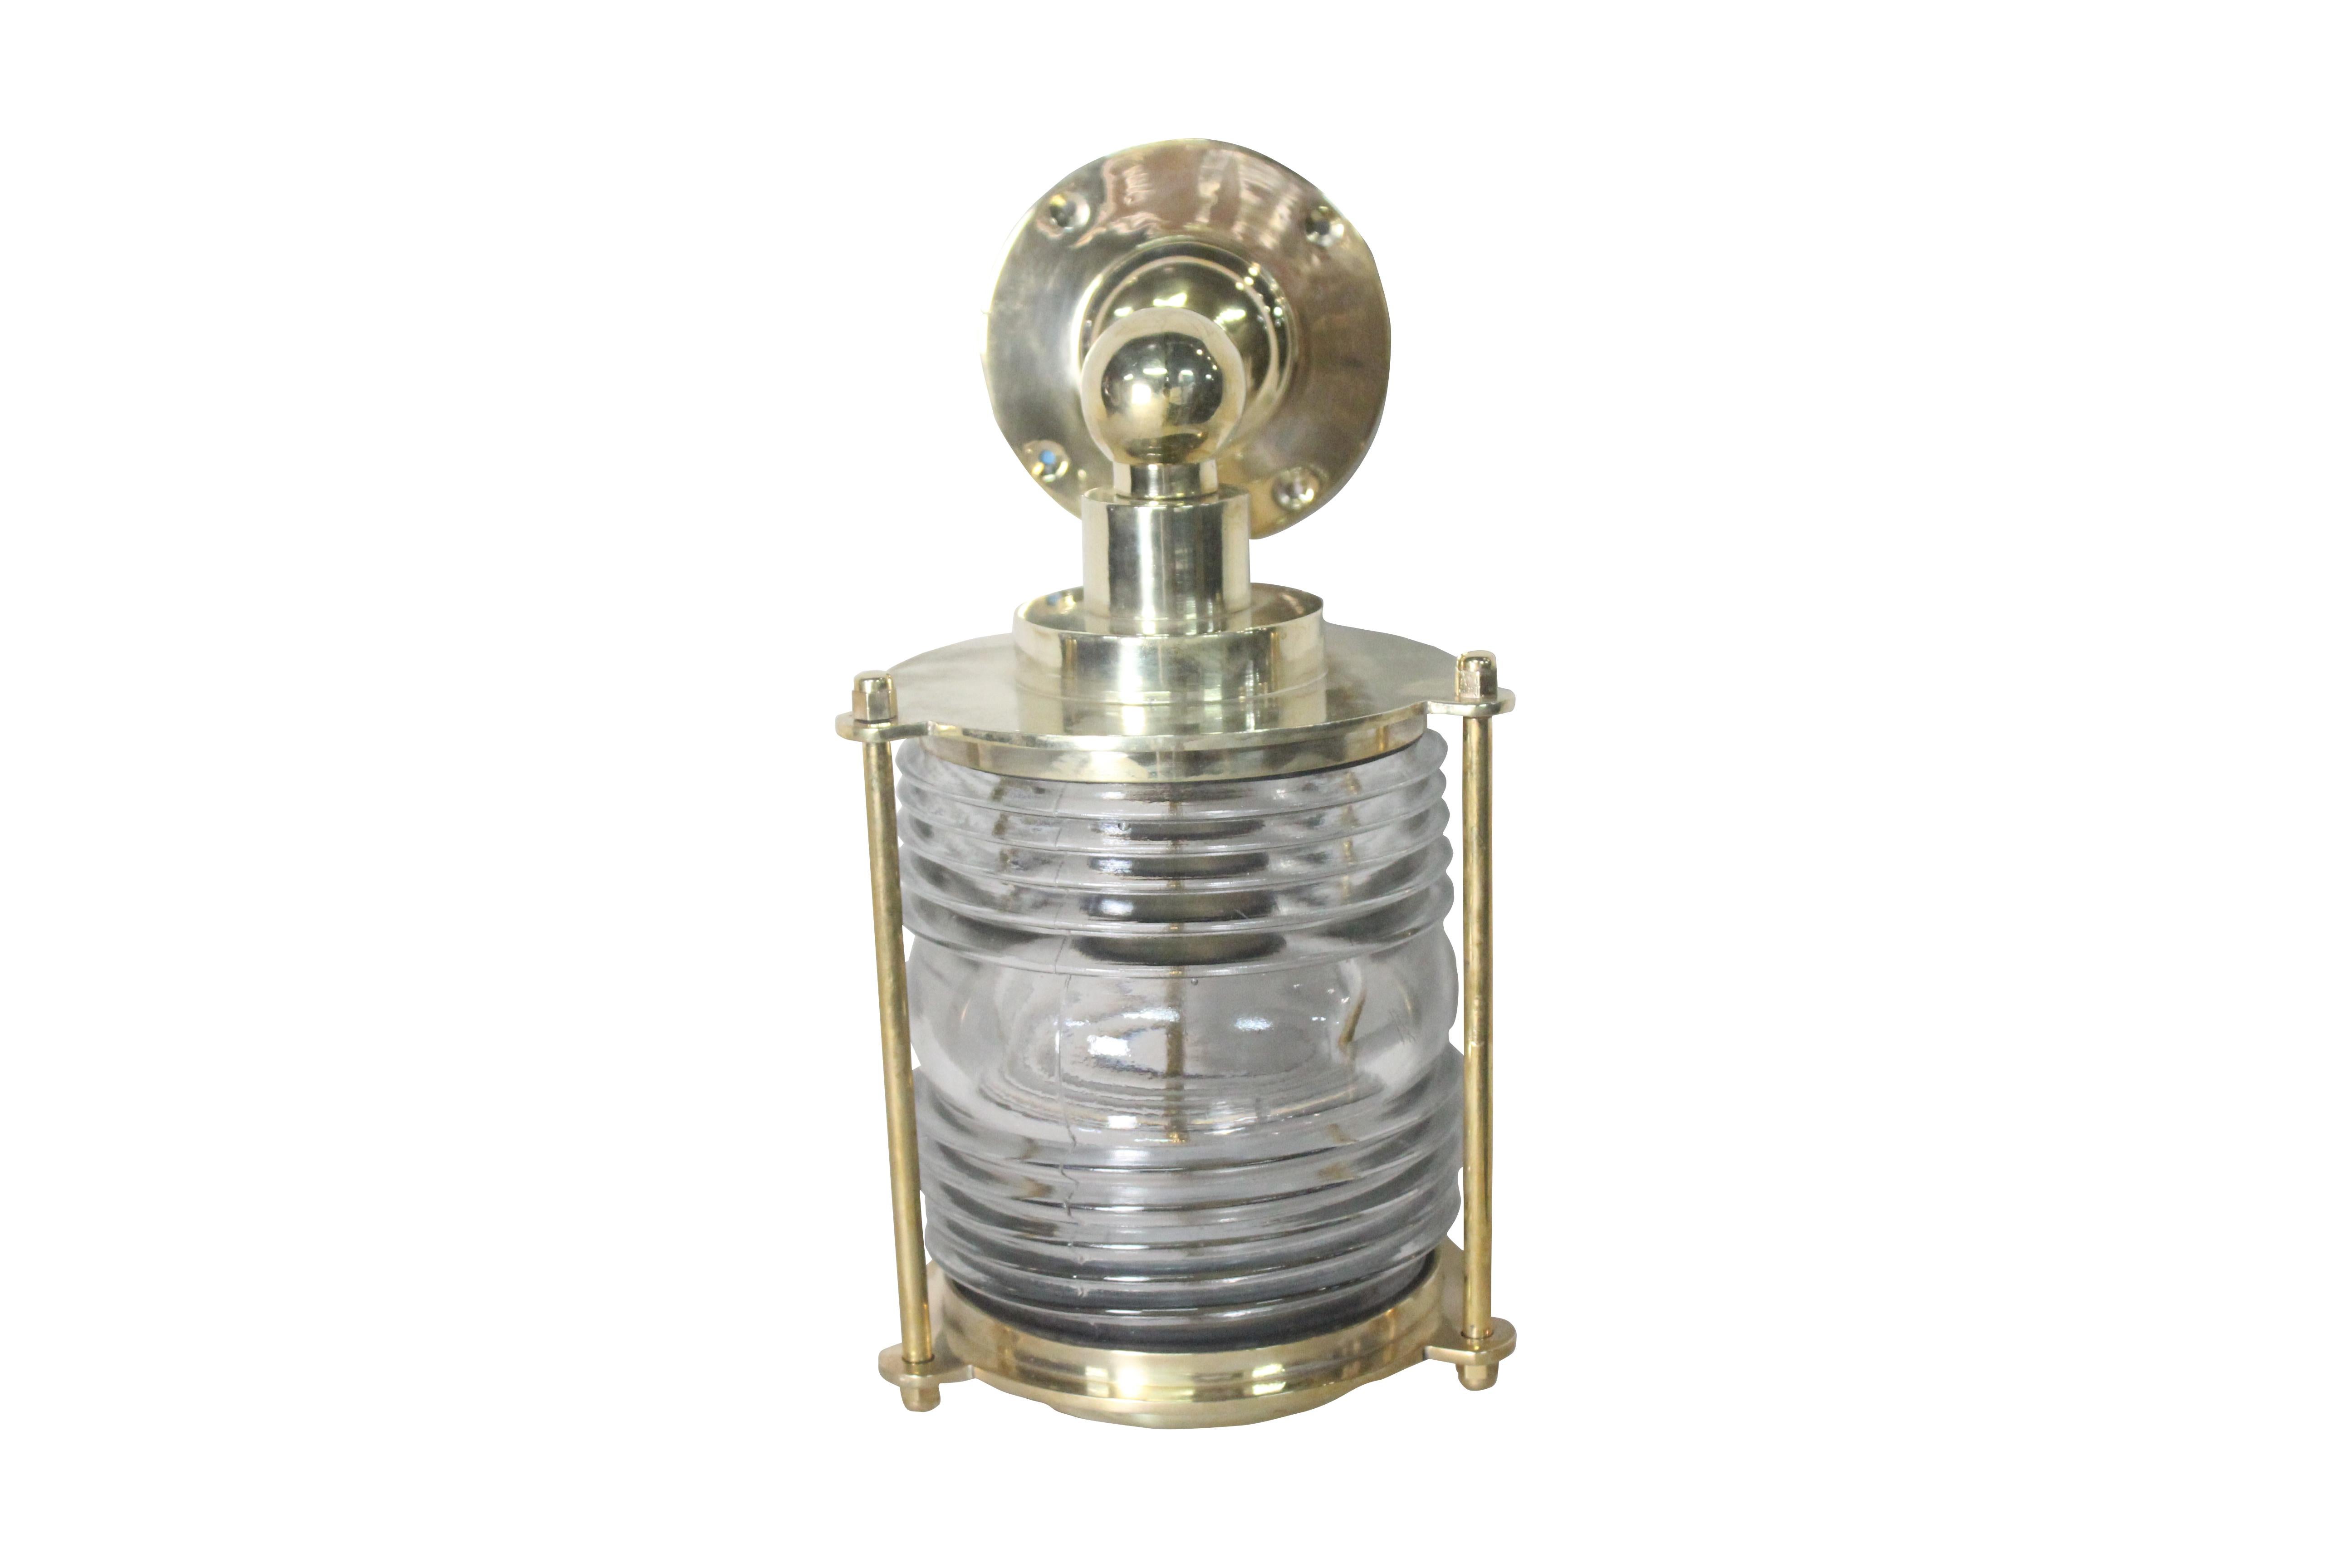 A fabulous and robust pair of brass ship's post lights with Fresnel glass lens converted to wall-mounted sconce lights which can be used indoors or out. Originally European, these have been rewired for American use. Takes a standard base bulb.